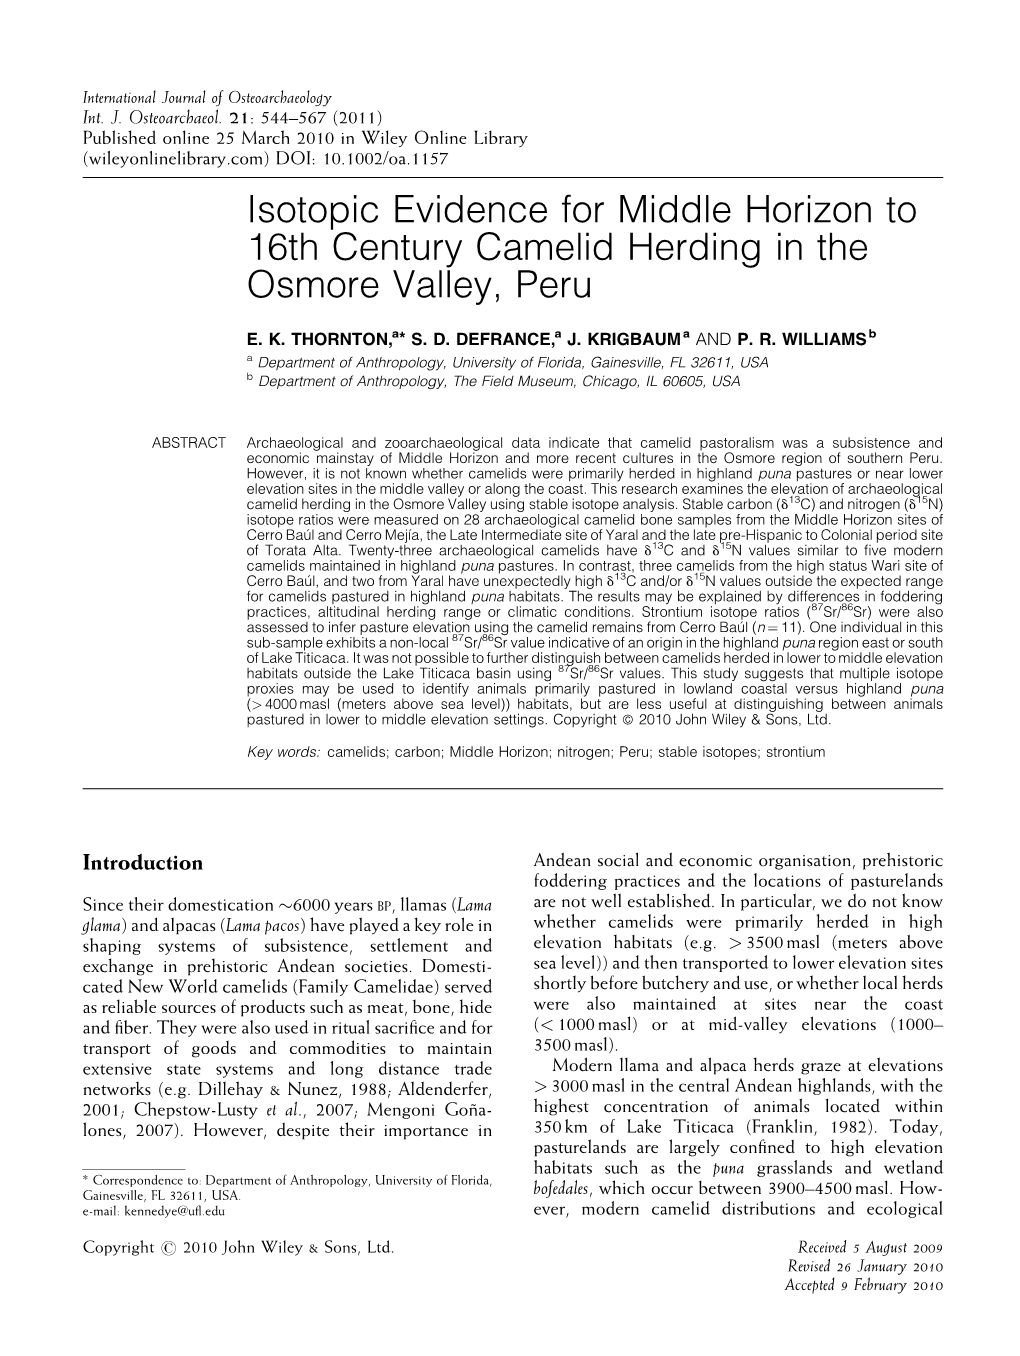 Isotopic Evidence for Middle Horizon to 16Th Century Camelid Herding in the Osmore Valley, Peru